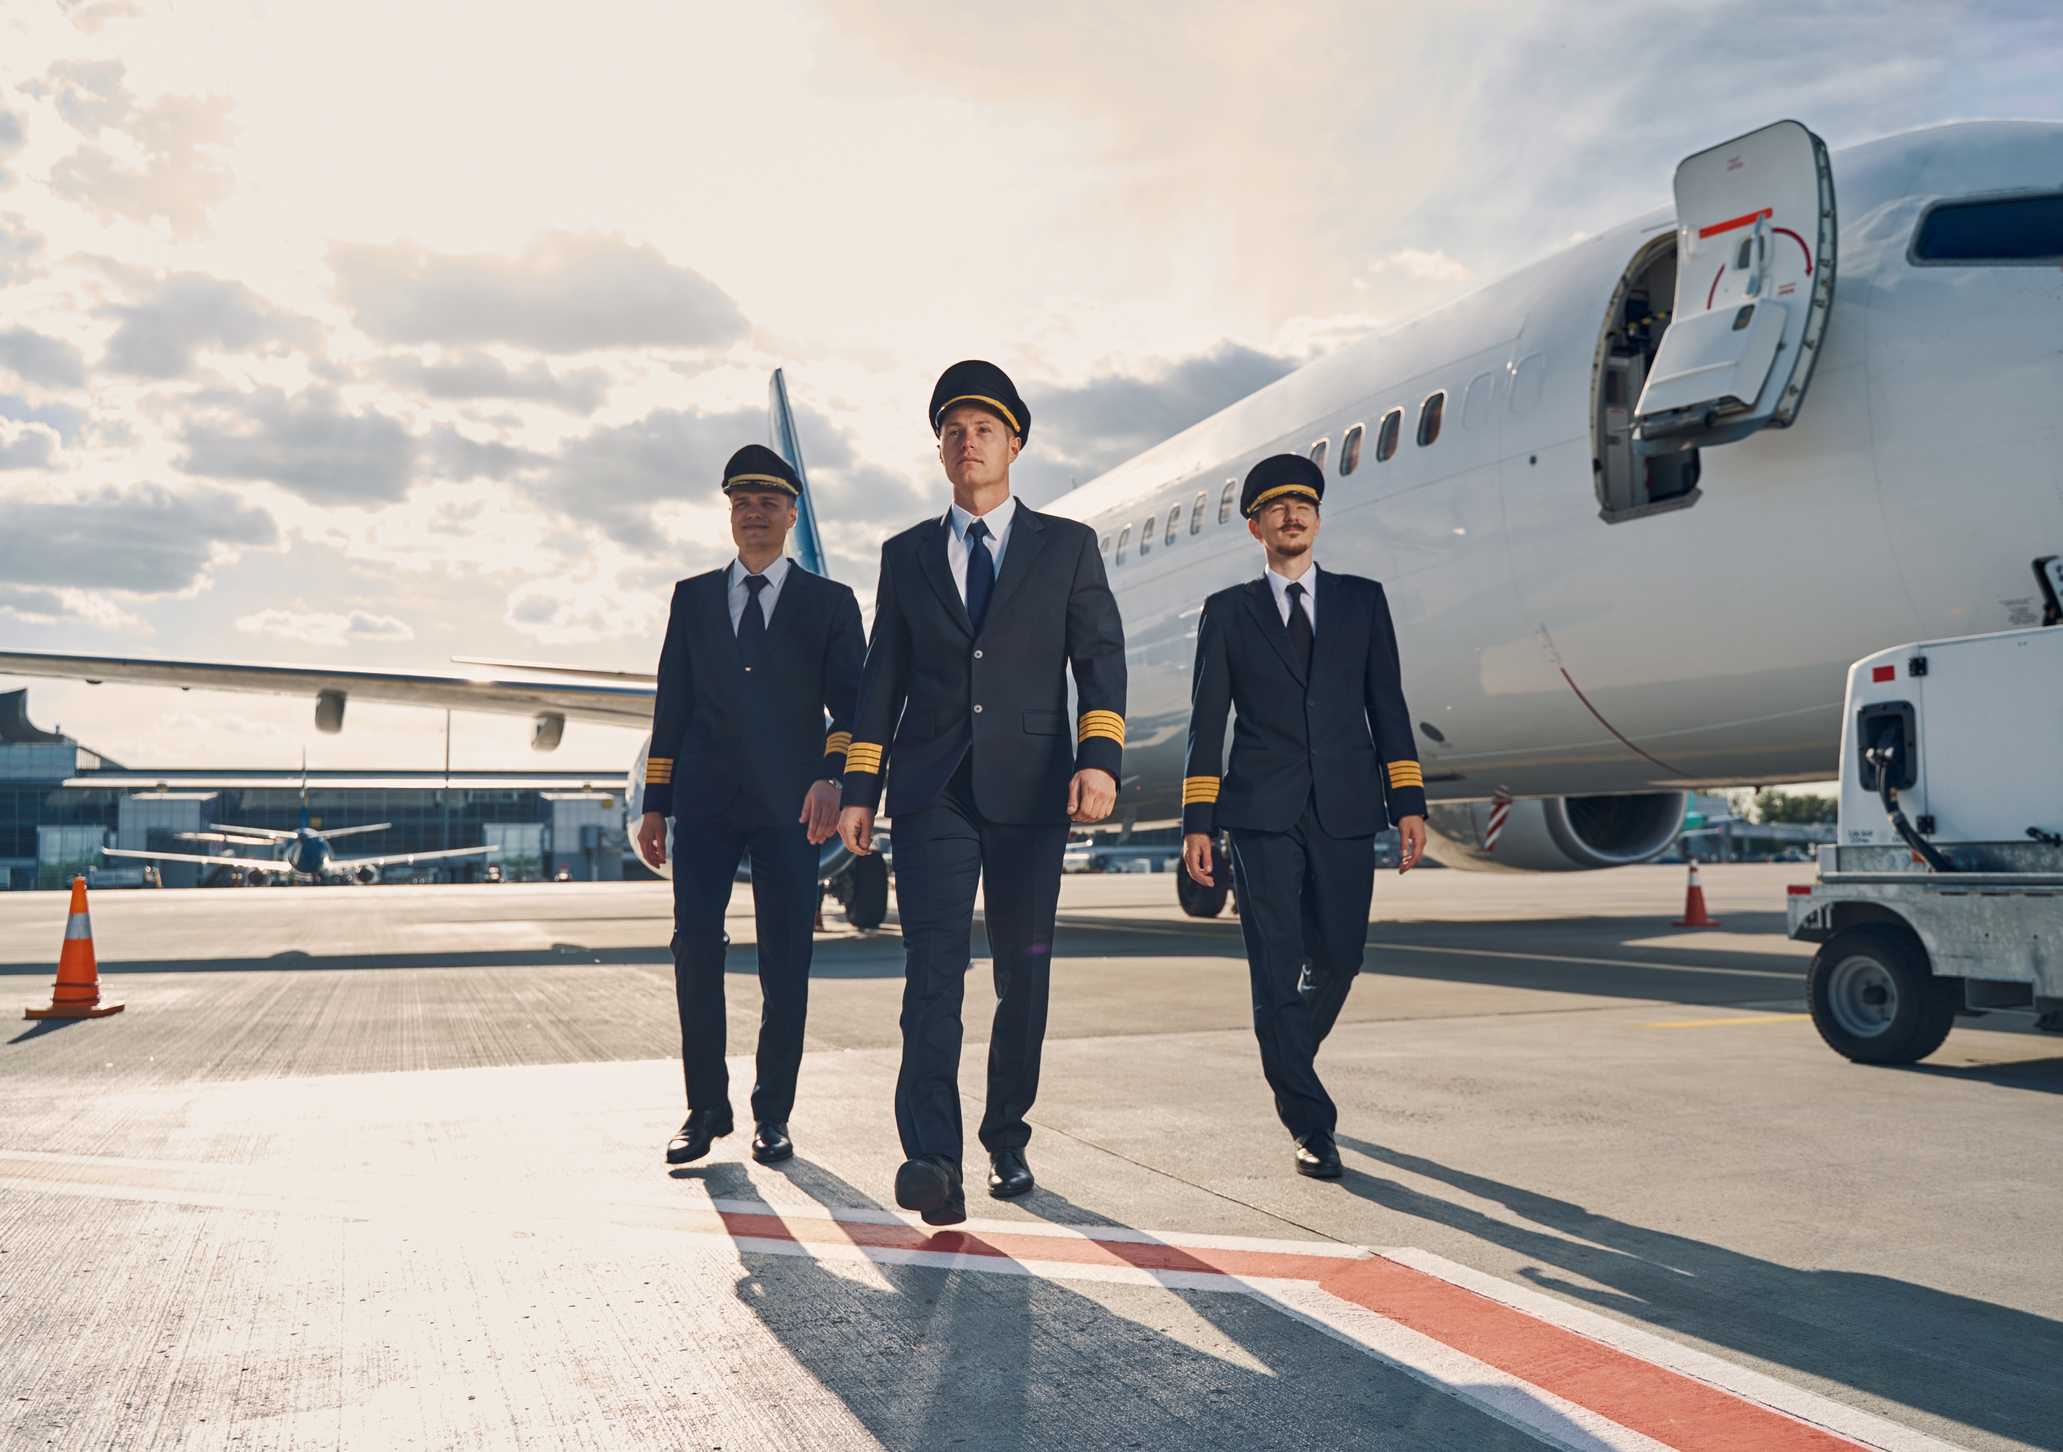 The Benefits of Airline Cadet Programs - CAU